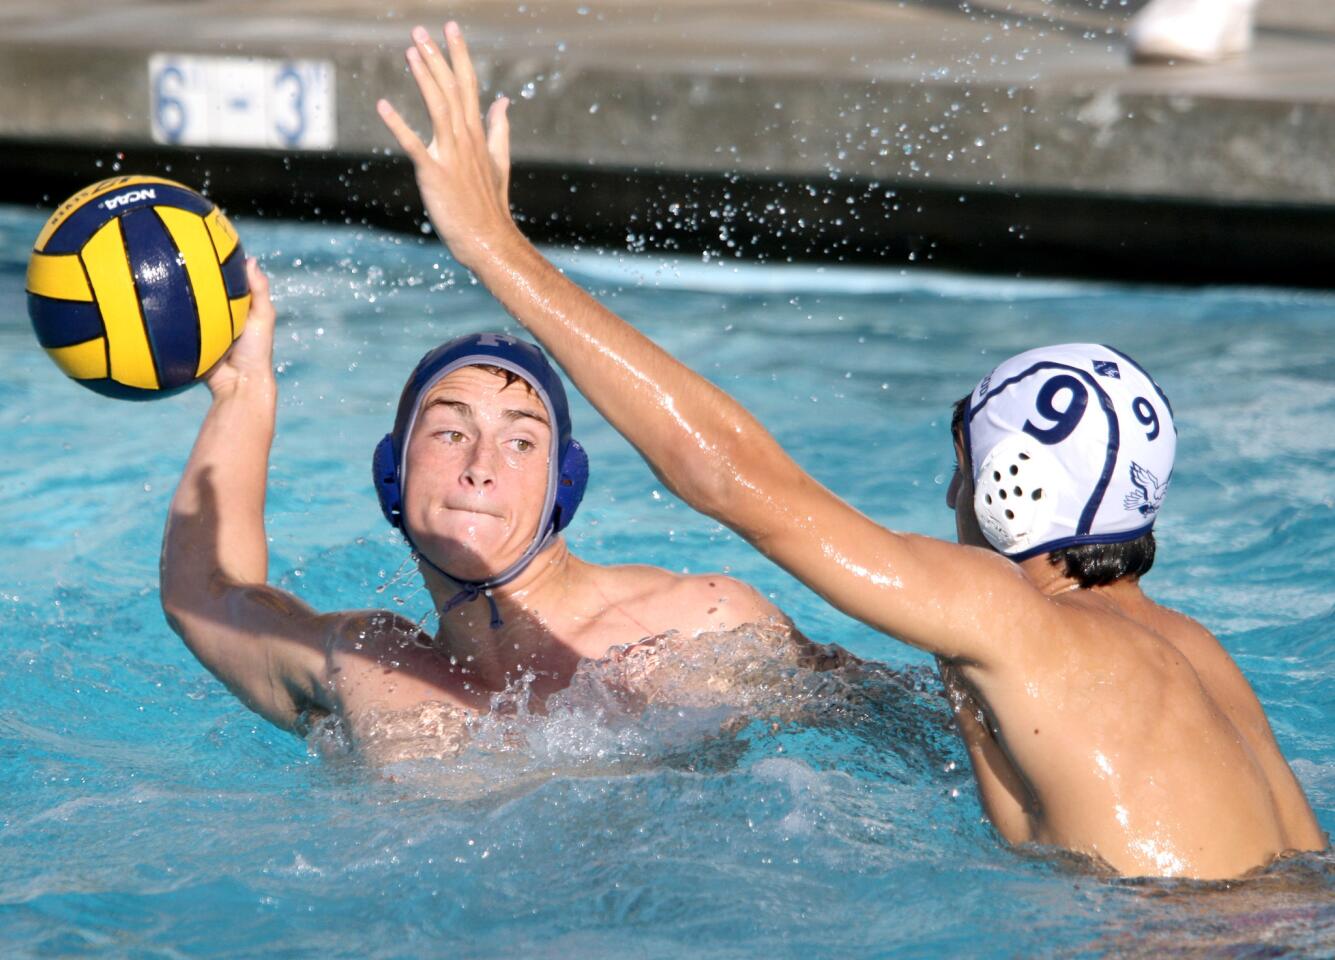 Flintridge Prep water polo player #11 Sean King takes a shot and scores even under pressure from Brentwood School's #9 Jared Rubin in home game in La Cañada Flintridge on Friday, October 23, 2015. FP won the game 13-7 after a 9-1 lead at the half.